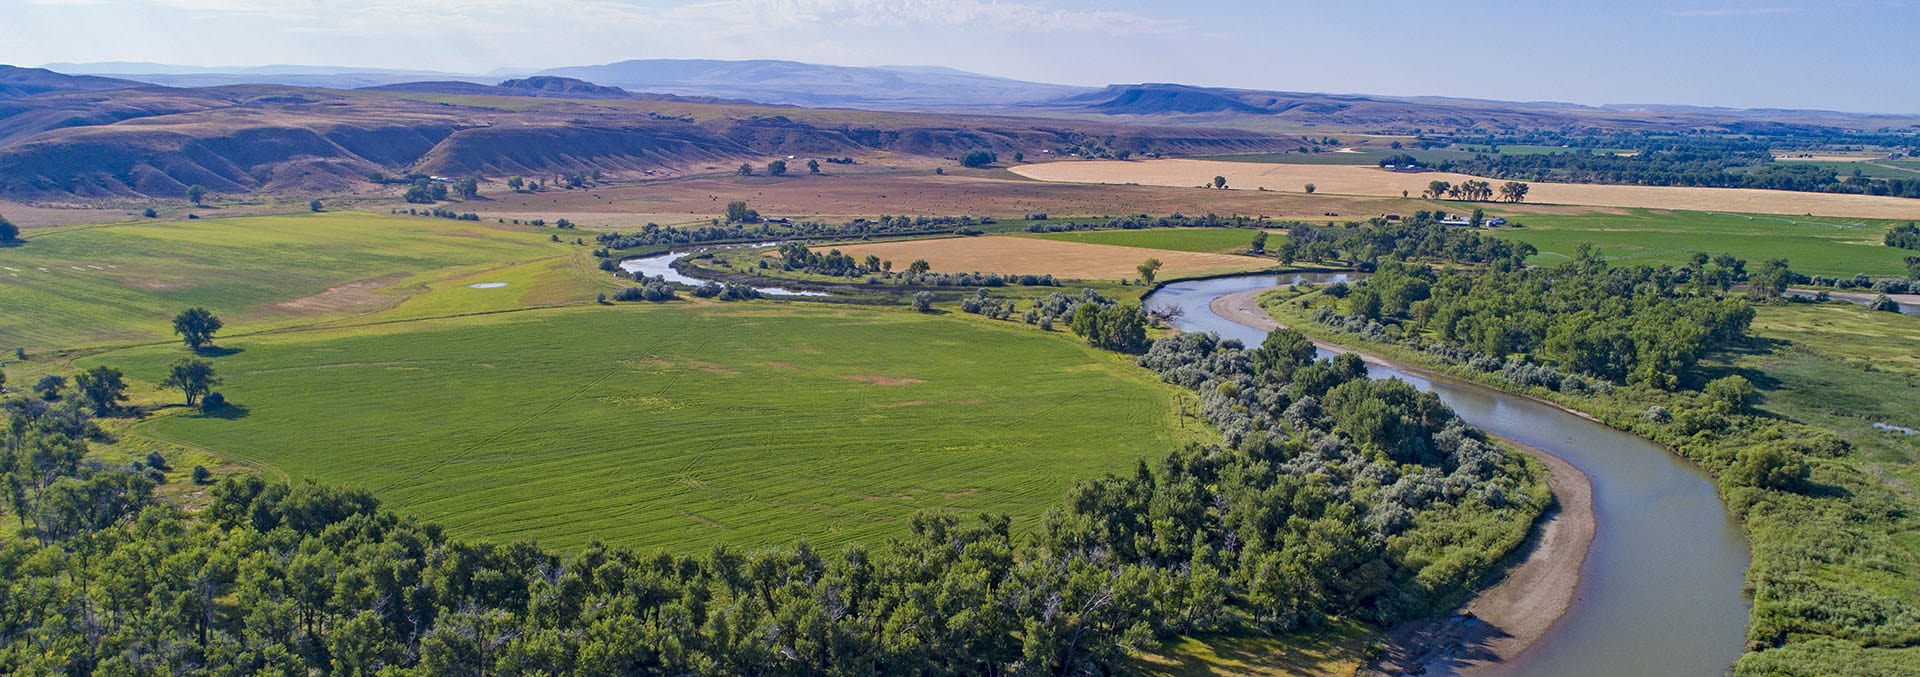 Riverbend Ranch Montana River Property For Sale Edgar Mt Fay